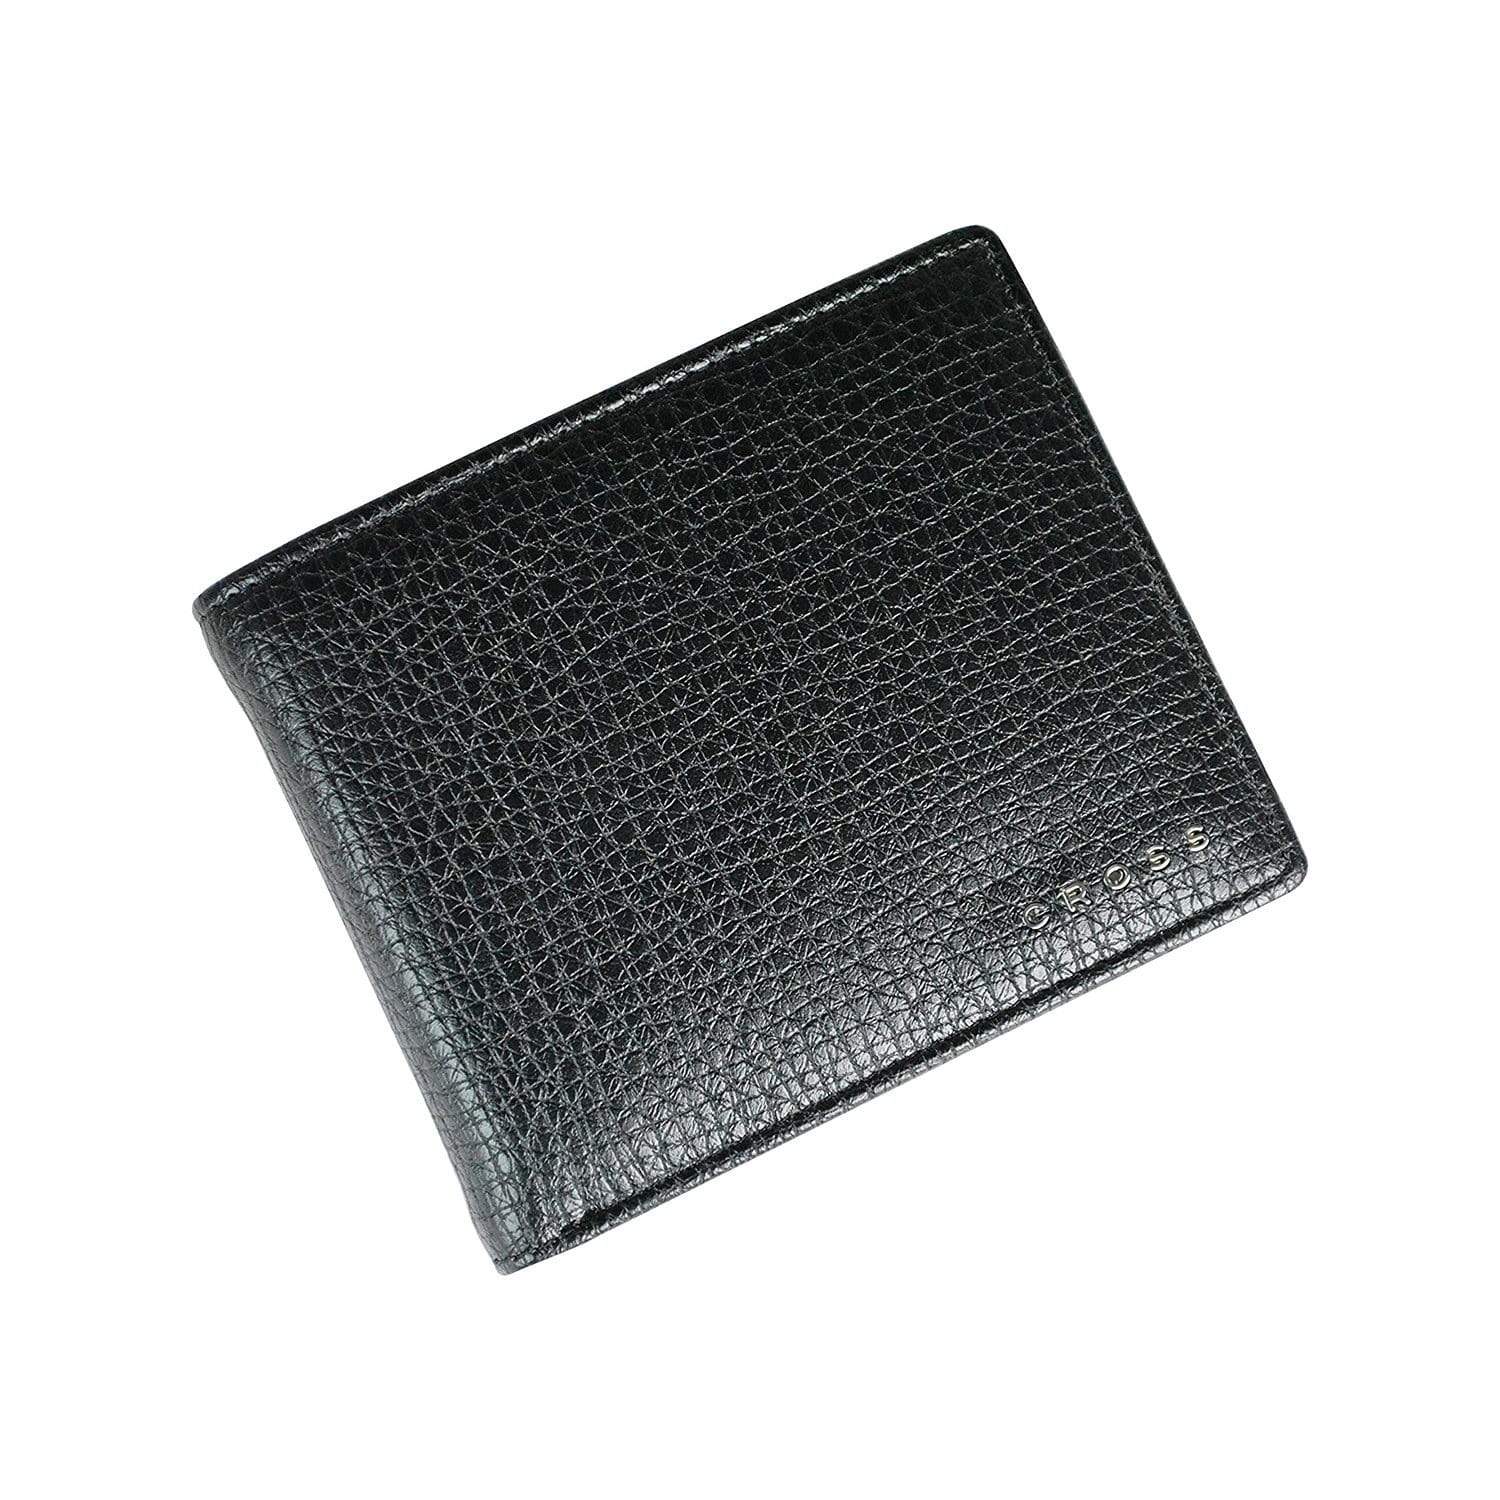 Cross RTC Bifold Coin Leather Wallet for Men  - Black - AC238072N-1 - Jashanmal Home